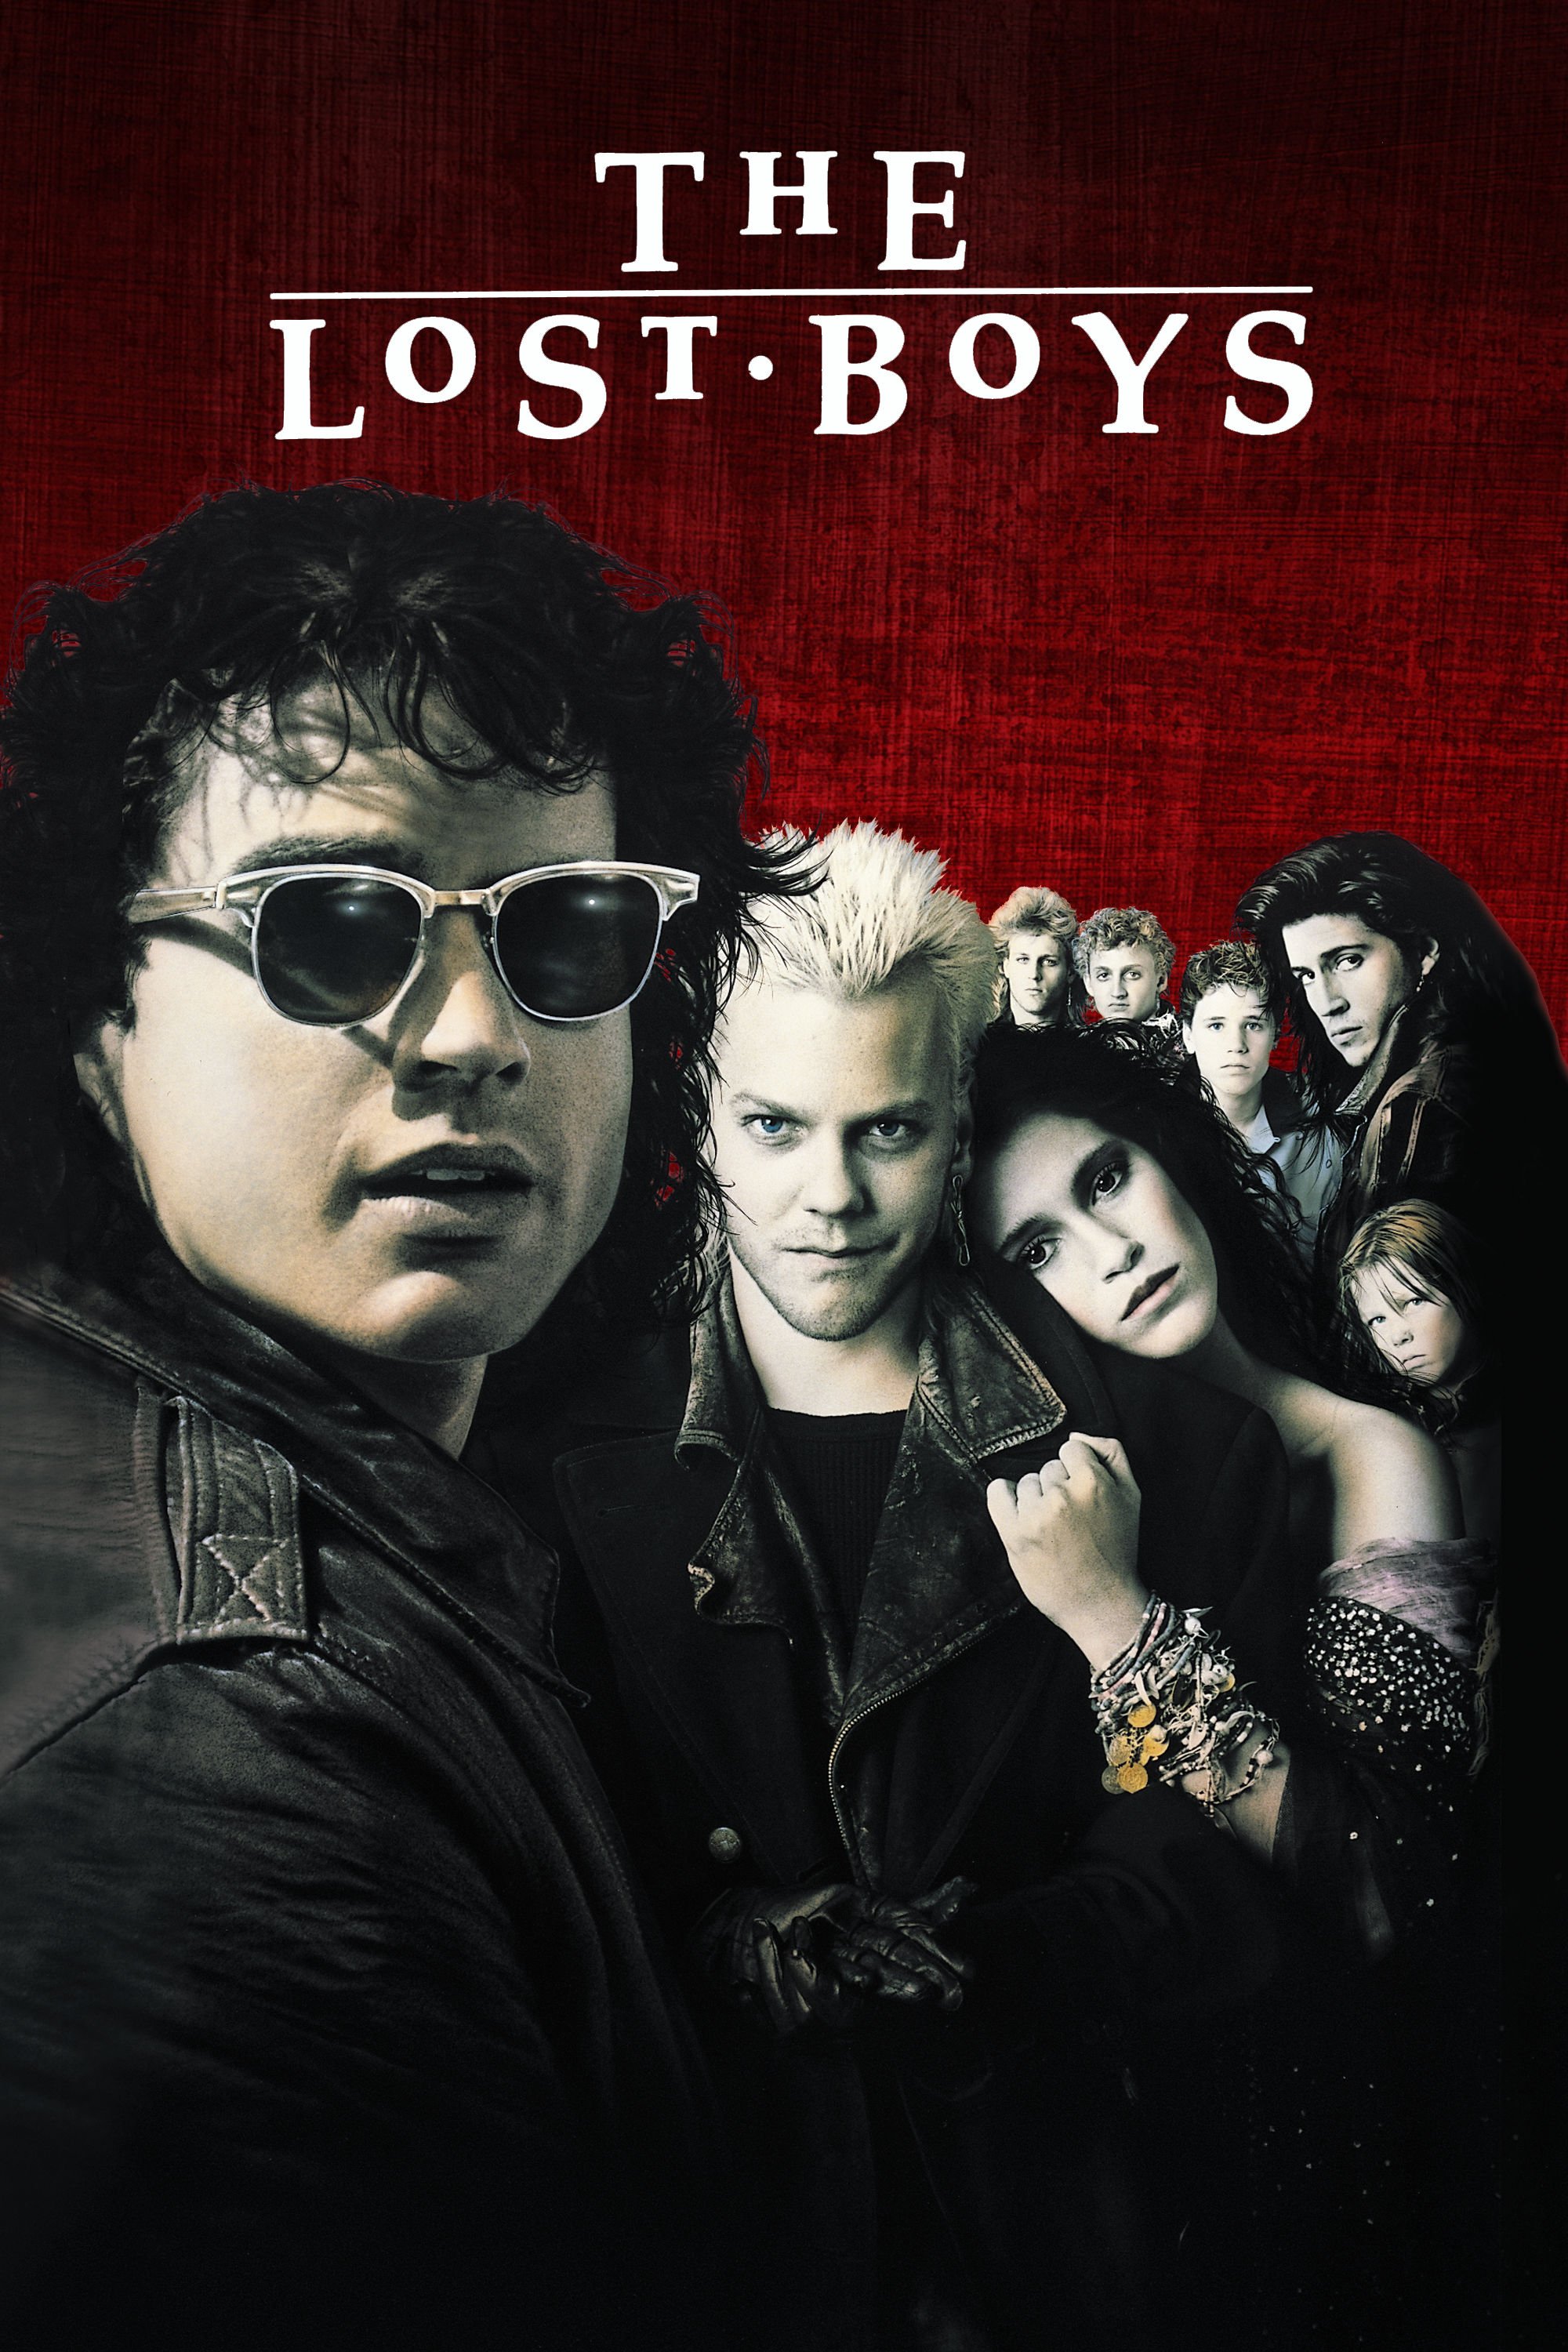 the-lost-boys-filming-locations-itunes-poster